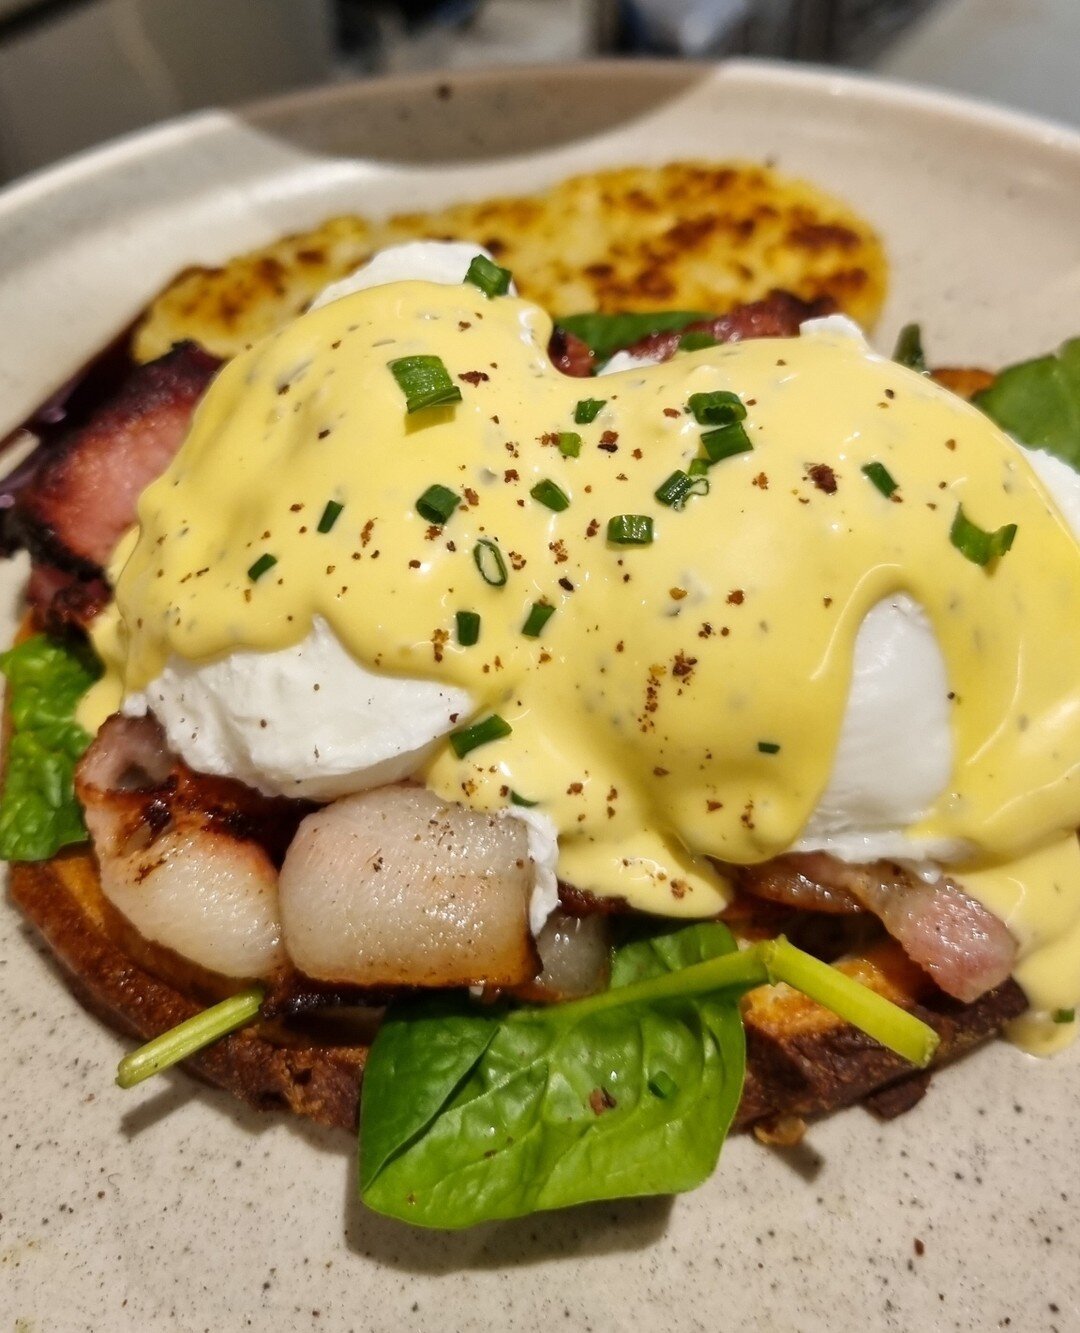 Breakfast is served! Yummo!😍 Who is your benny date this weekend? #bennydate⁠
⁠
Tag a friend in this thread and head to Frankie &amp; George for Breakfast this weekend.  We are open Saturday &amp; Sunday 6:30am to 11:30am⁠
.⁠
.⁠
.⁠
.⁠
.⁠
.⁠
.⁠
.⁠
.⁠